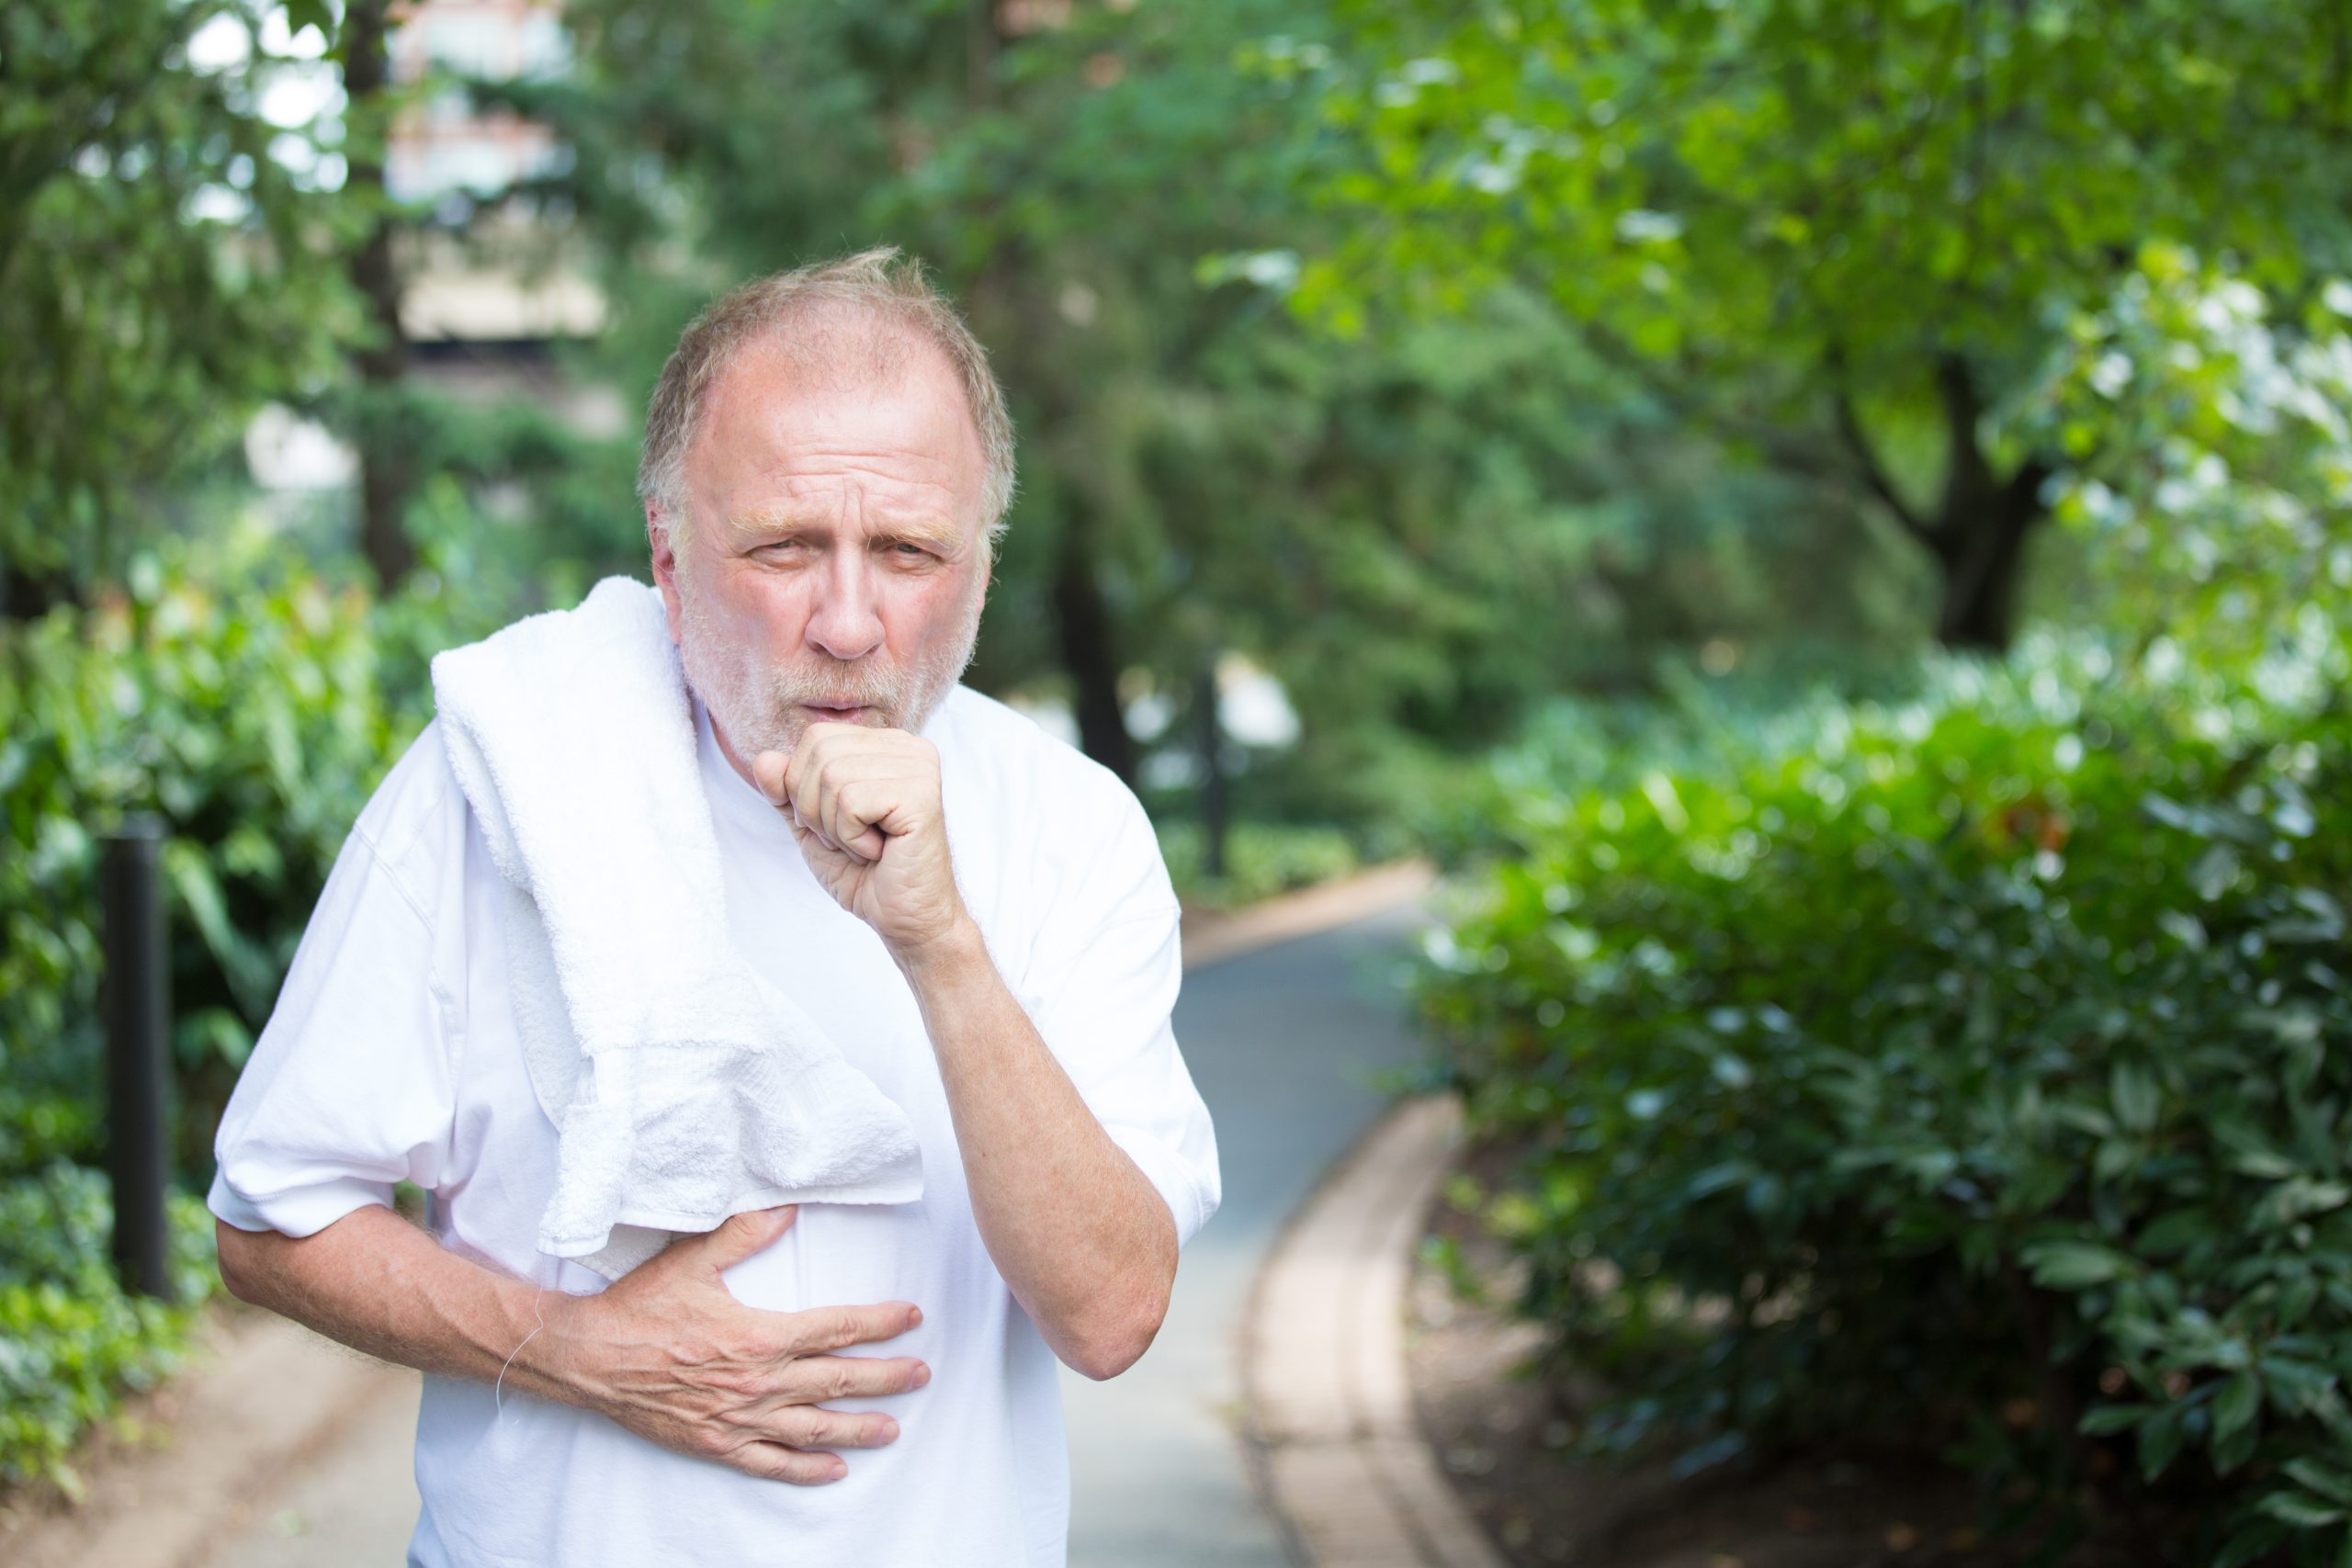 Closeup portrait, old gentleman in white shirt with towel, coughing and holding stomach, isolated green trees and shrubs, outside outdoors background